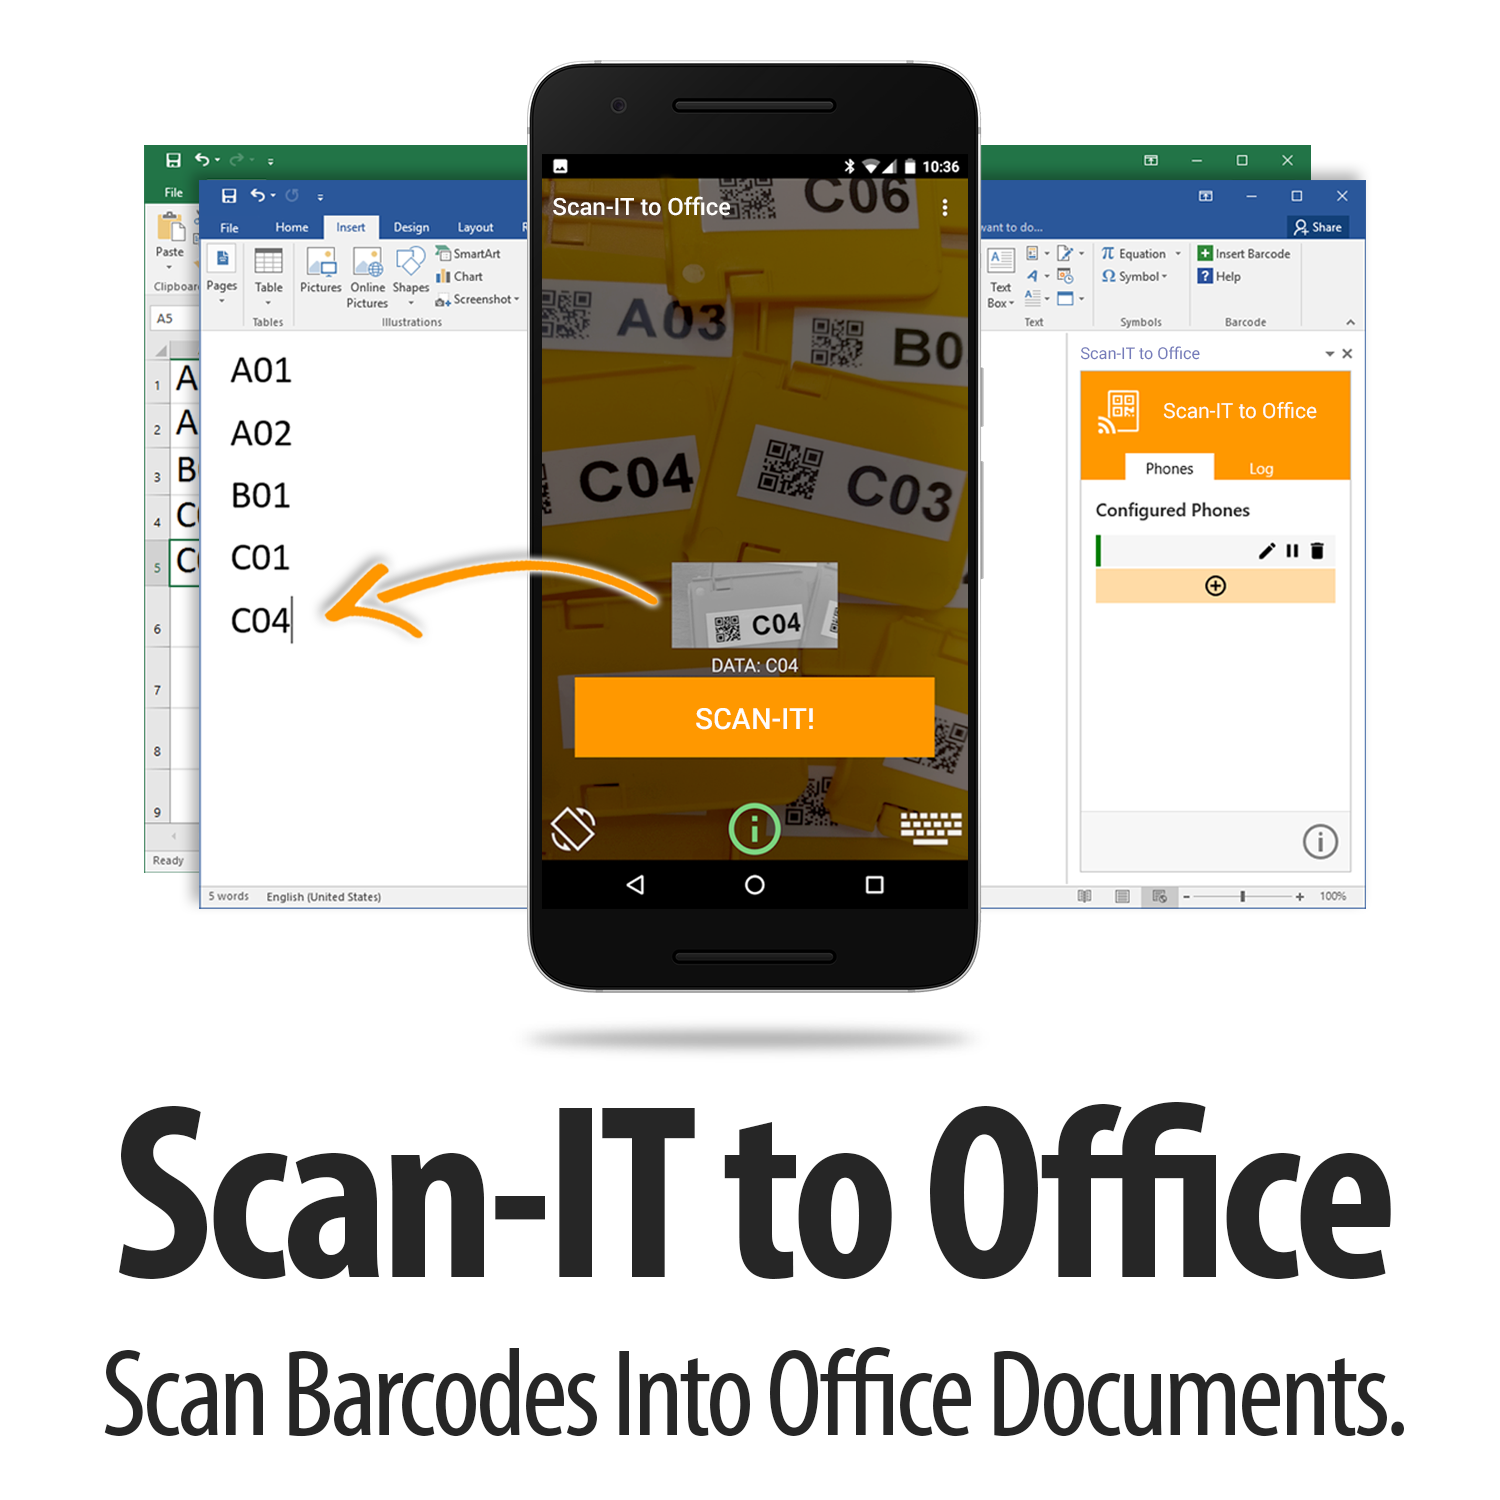 Scan-IT to Office: New App Scans Barcodes Directly Into Microsoft Office